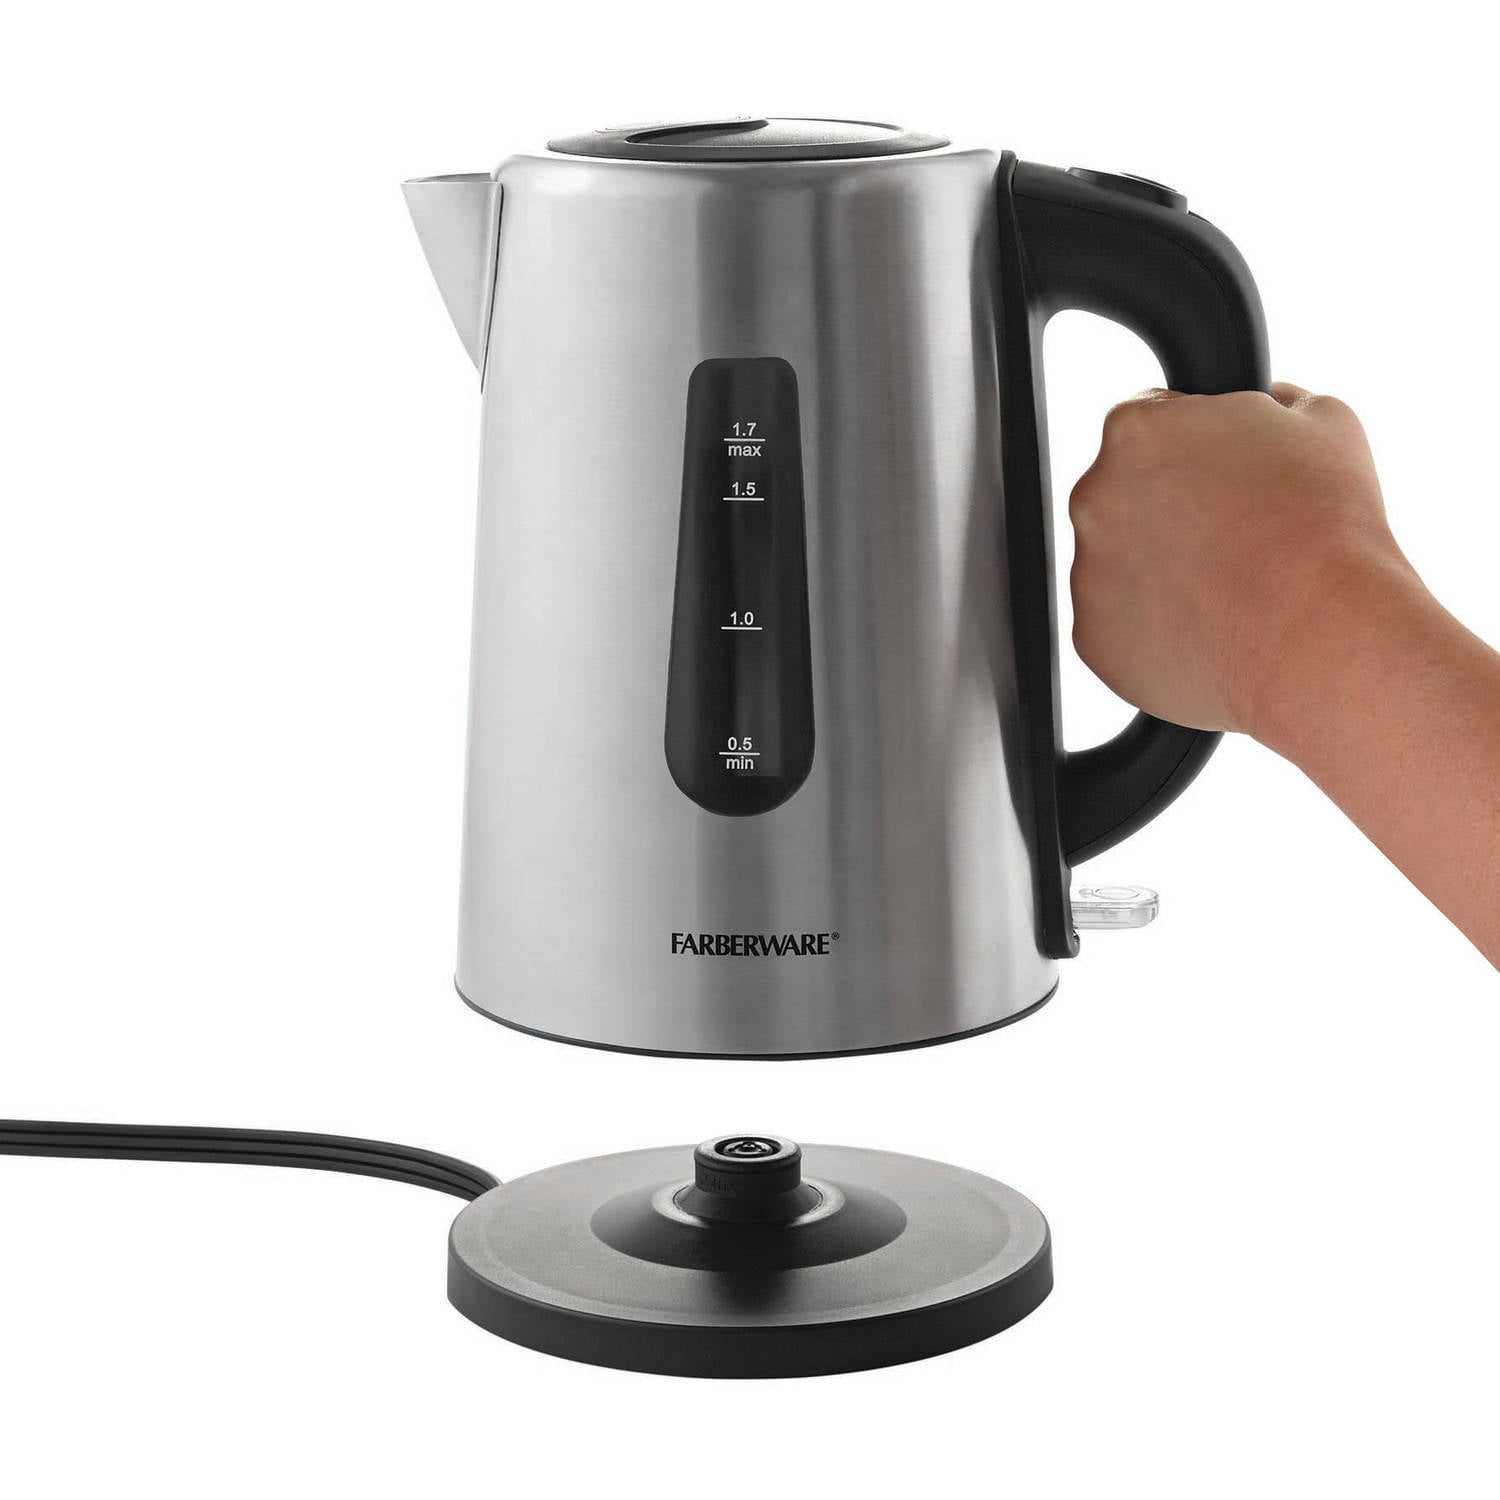 UNBOXING & REVIEW Farberware Stainless Steel Electric Kettle for Soup, Tea,  Coffee 